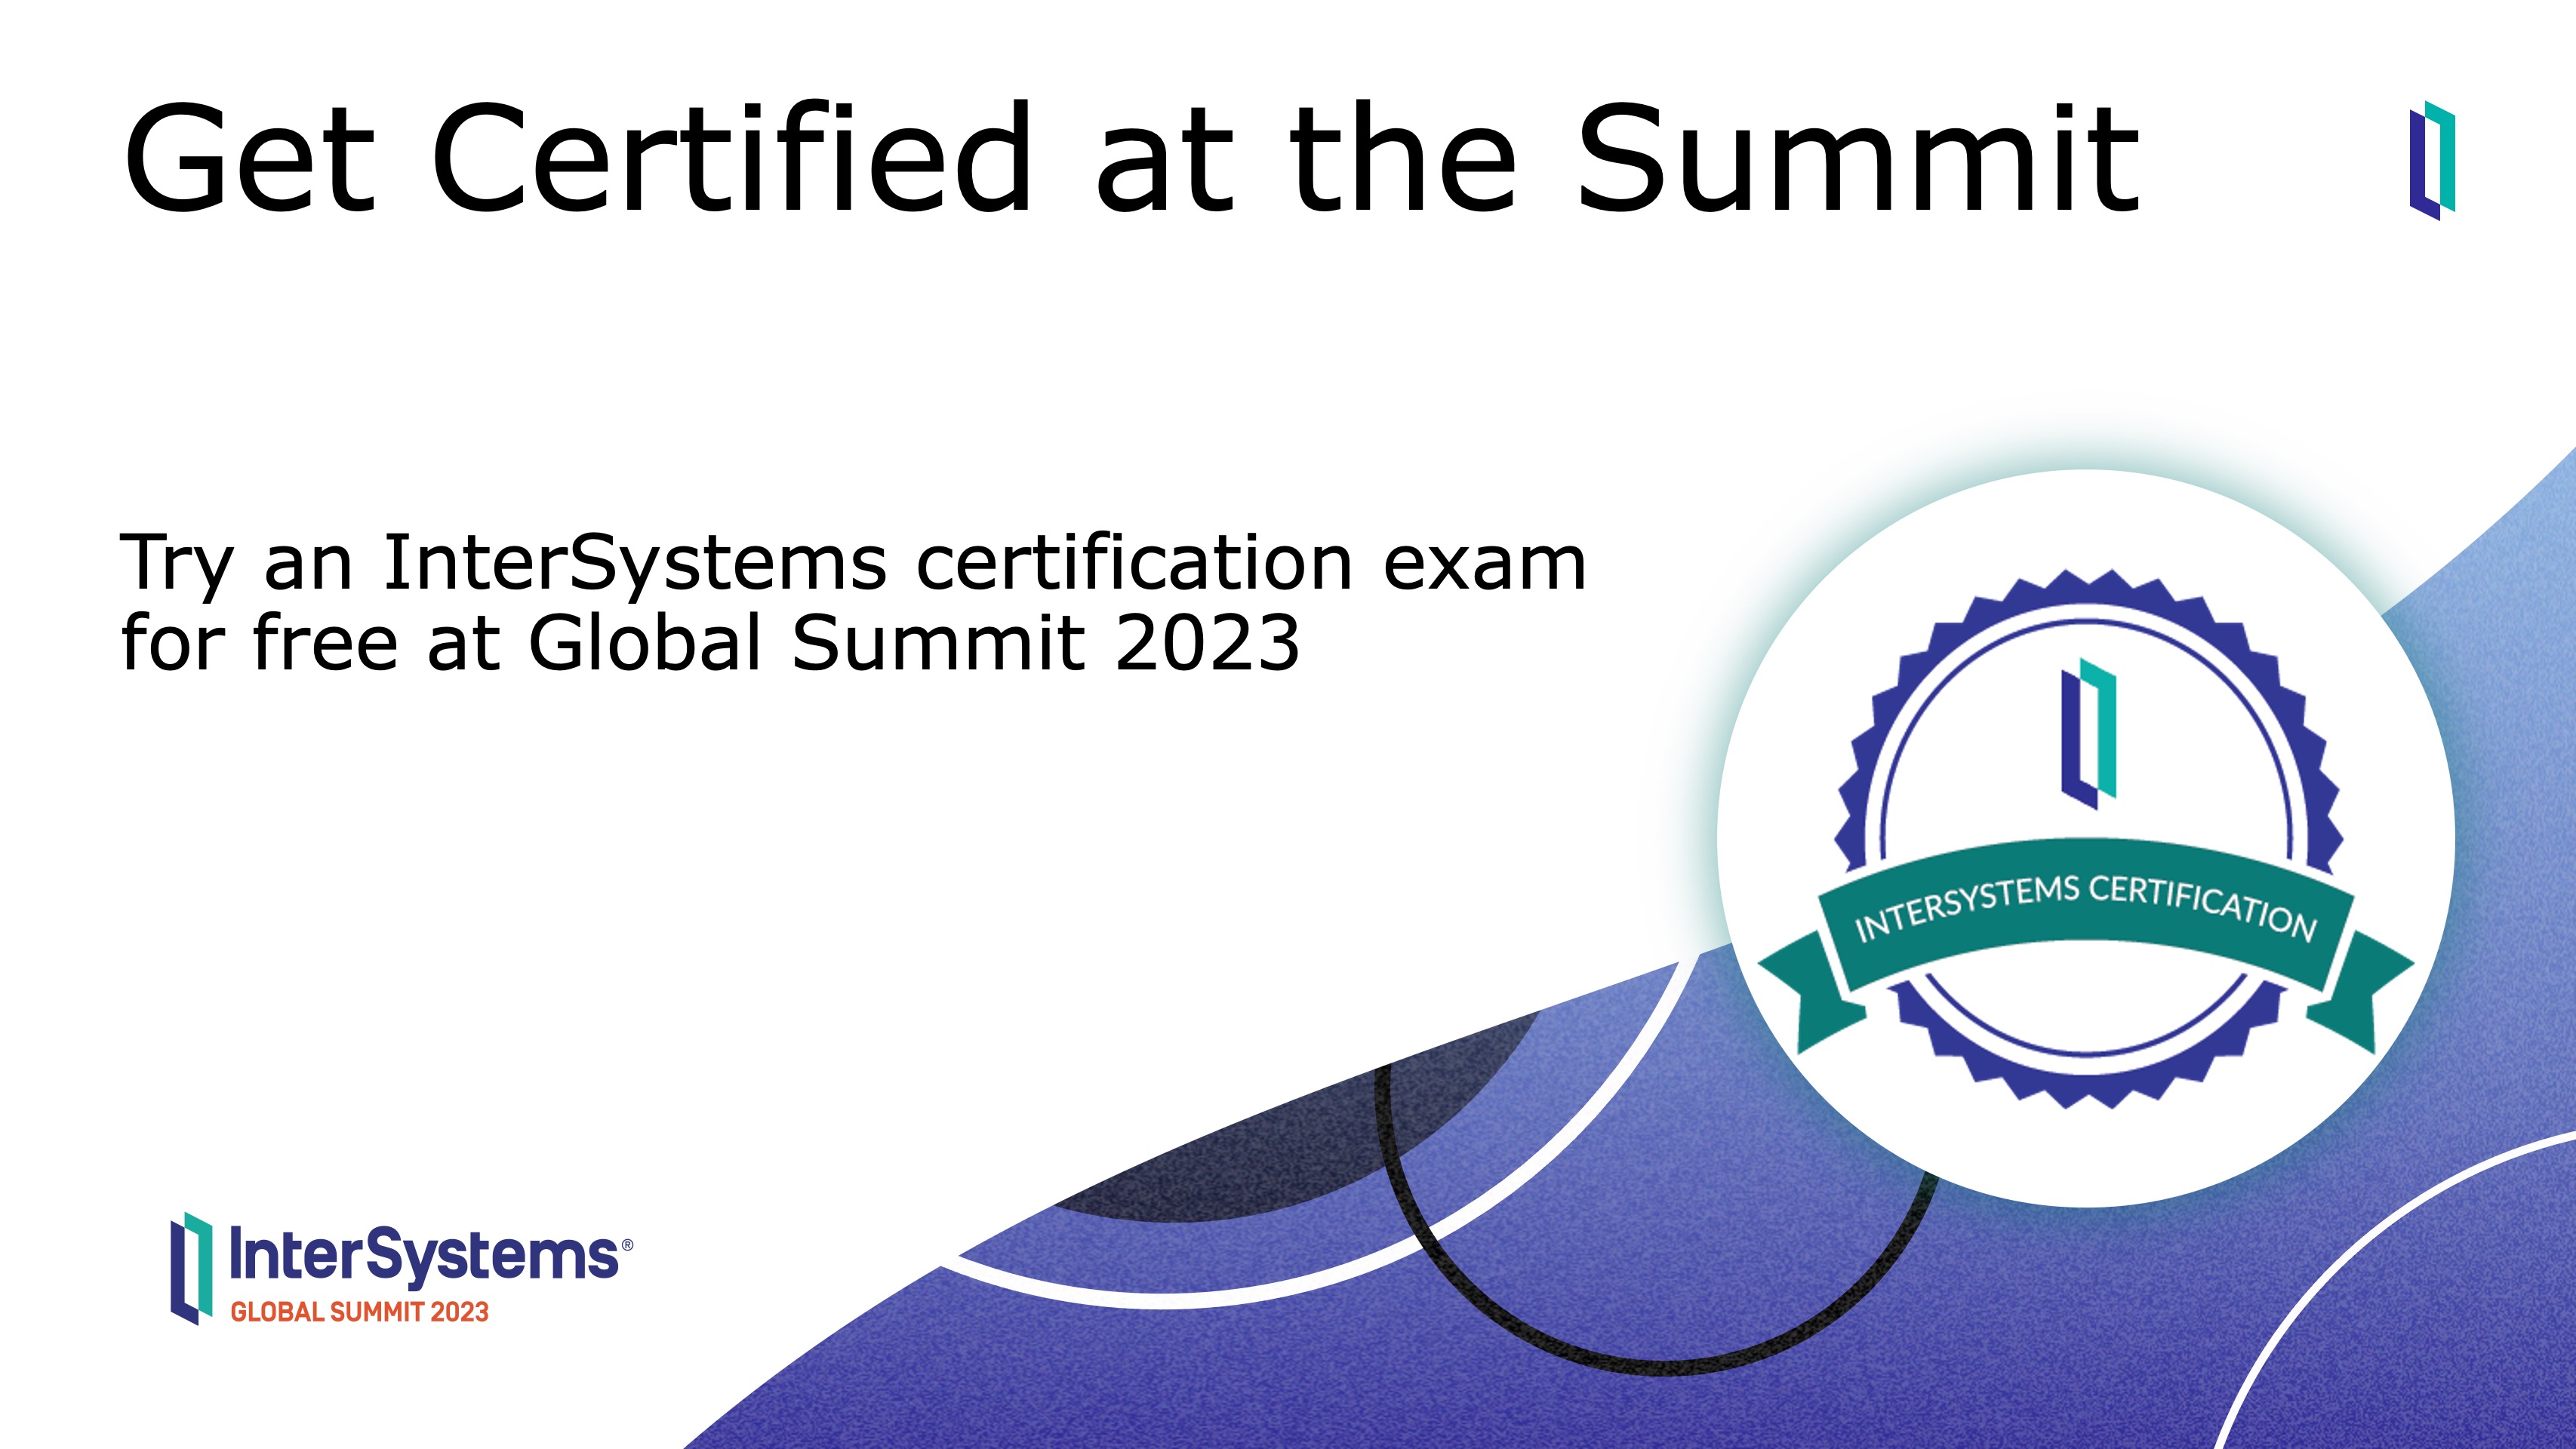 Get certified at the Summit: Try an InterSystems certification exam for free at Global Summit 2023